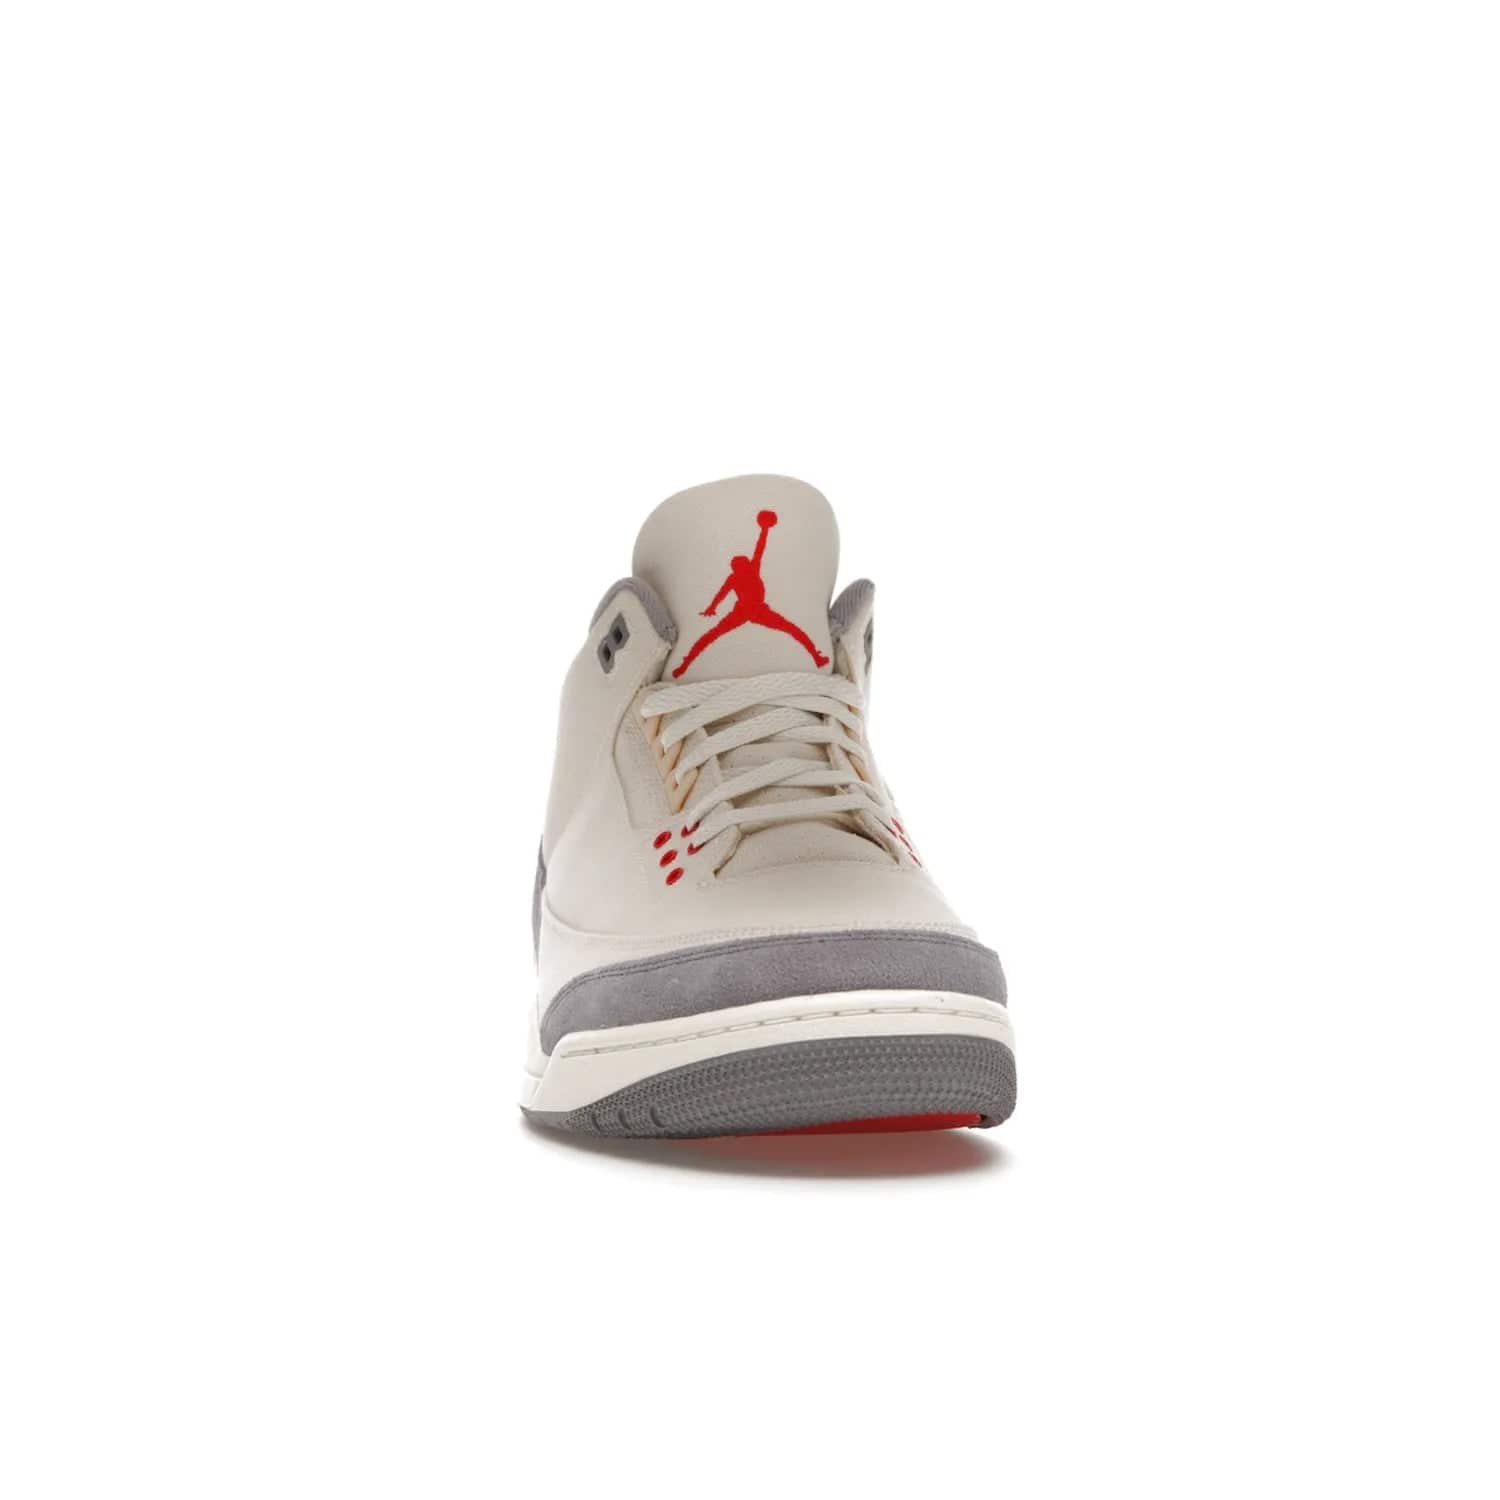 Jordan 3 Retro Muslin - Image 9 - Only at www.BallersClubKickz.com - Eye-catching Air Jordan 3 Retro Muslin in a neutral palette of grey, cream, and red. Featuring canvas upper, suede overlays and white/grey Air Max sole. Available in March 2022.